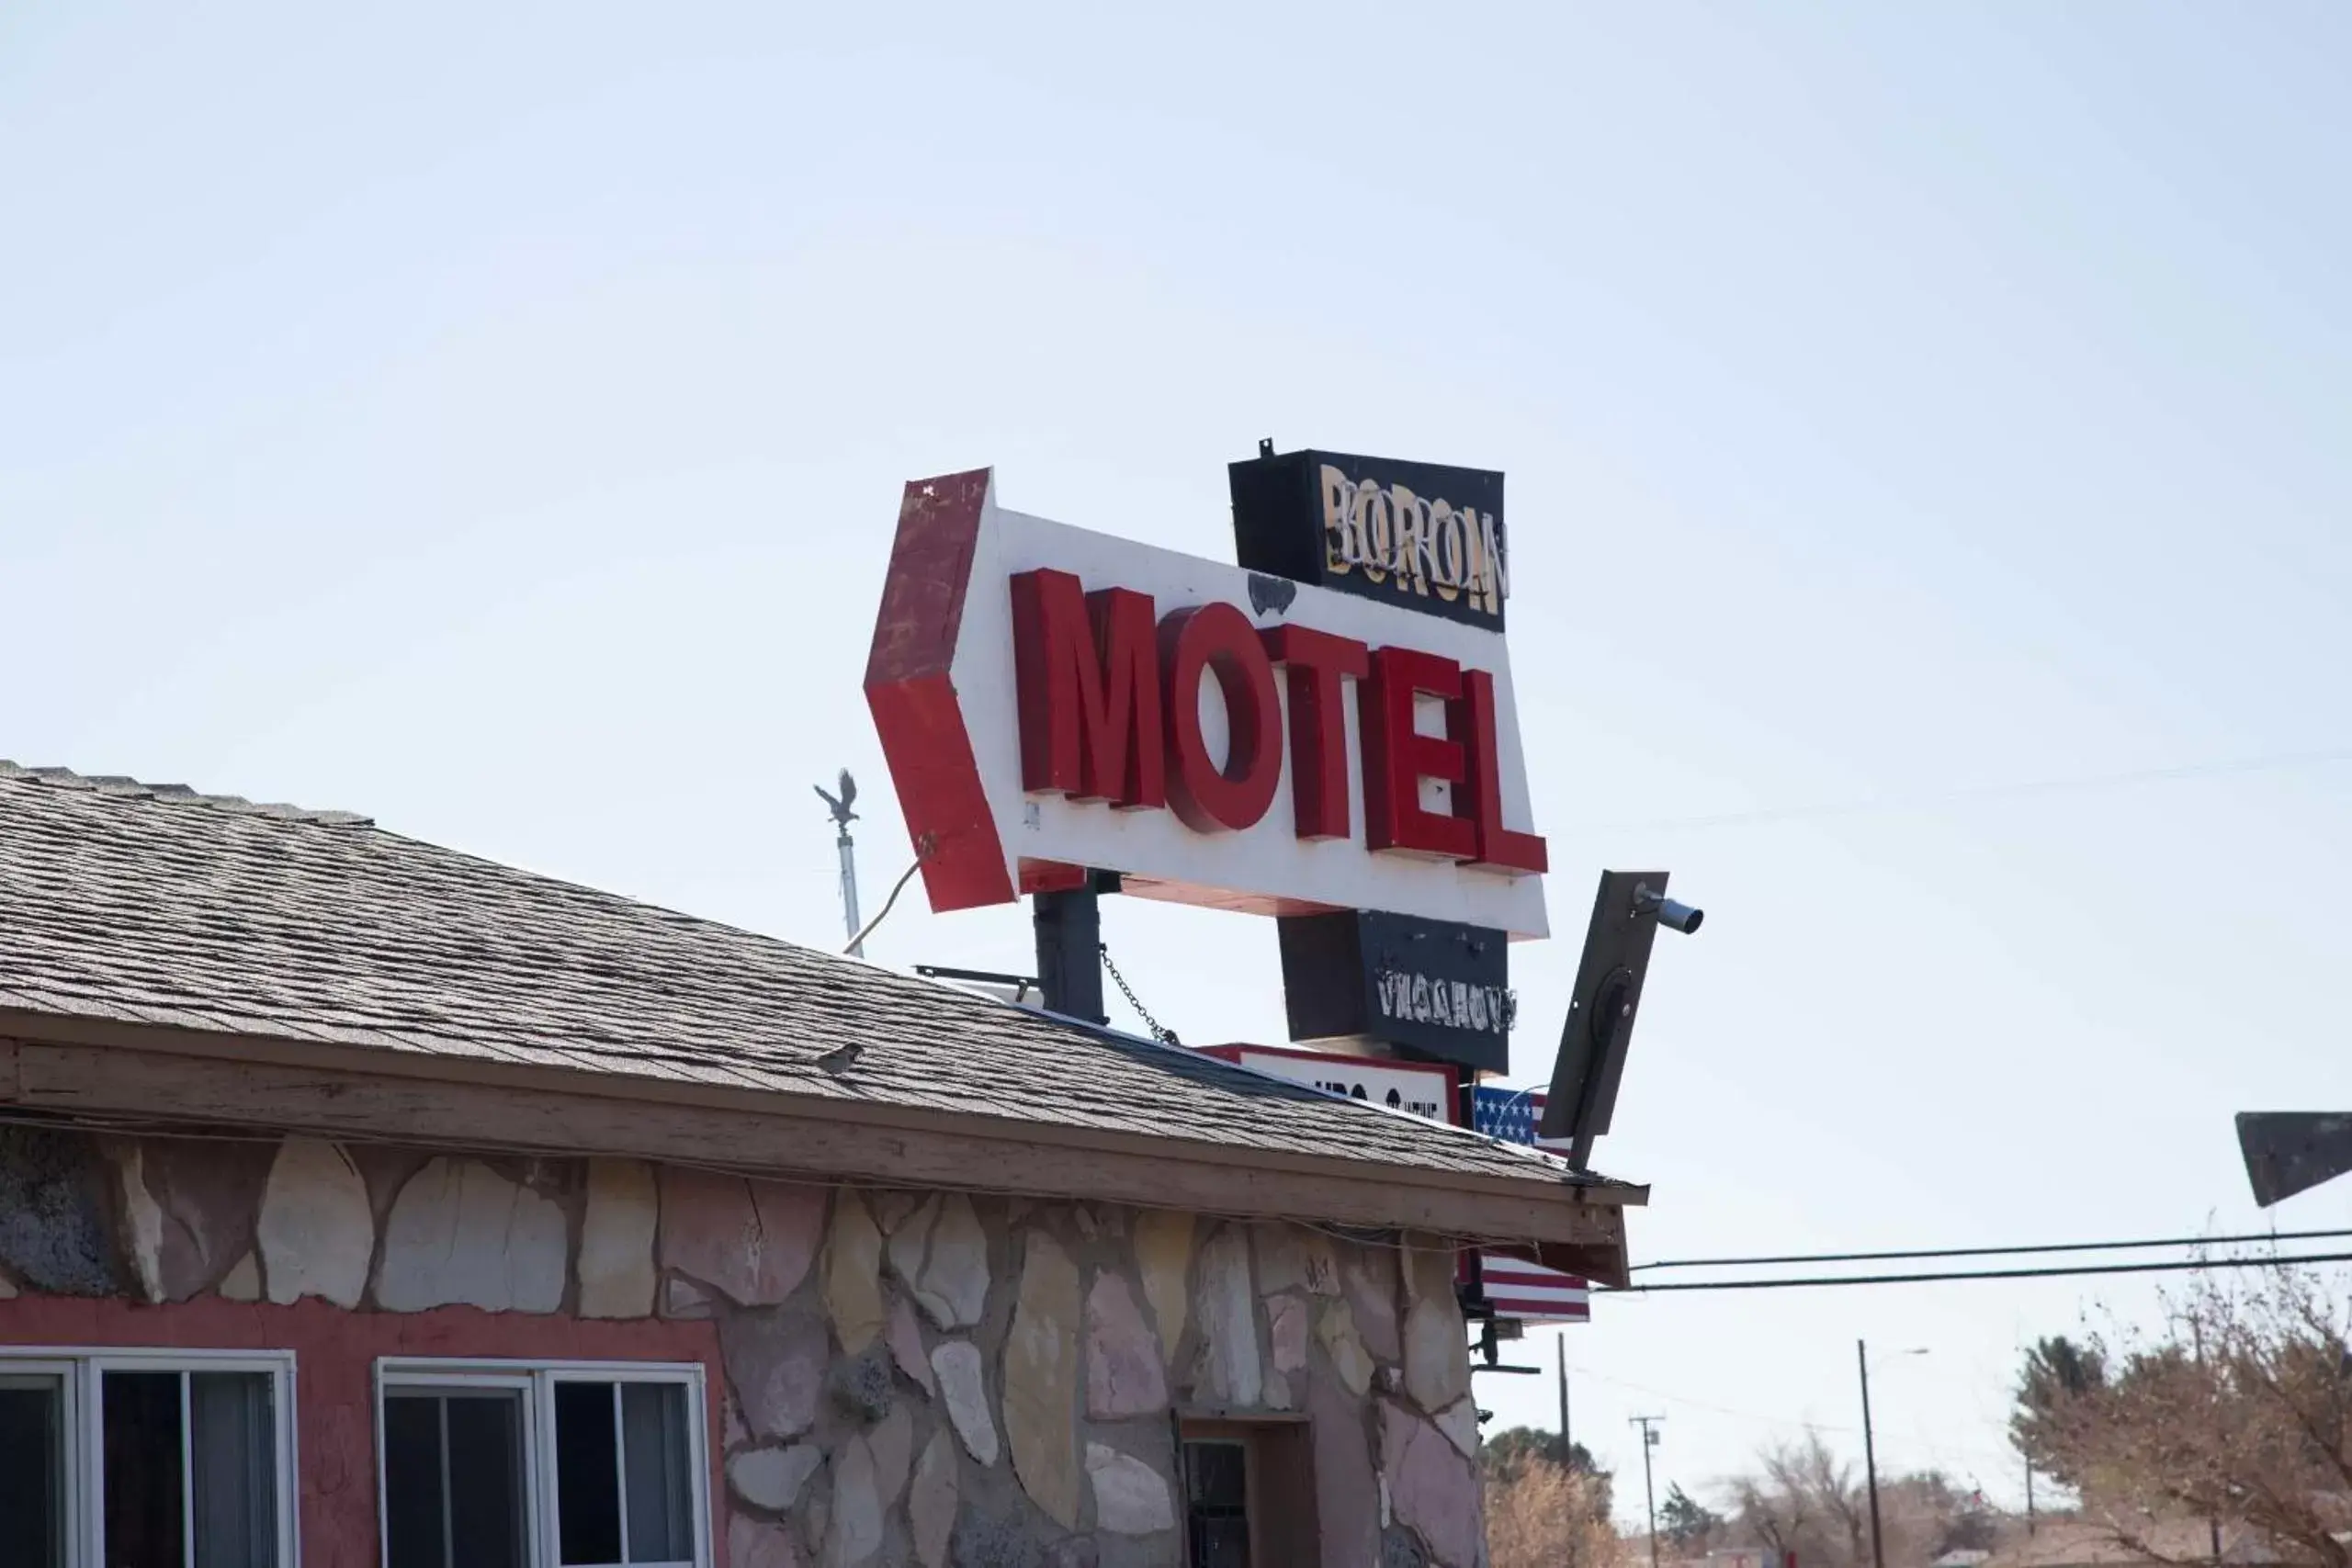 Other, Property Building in Boron Motel